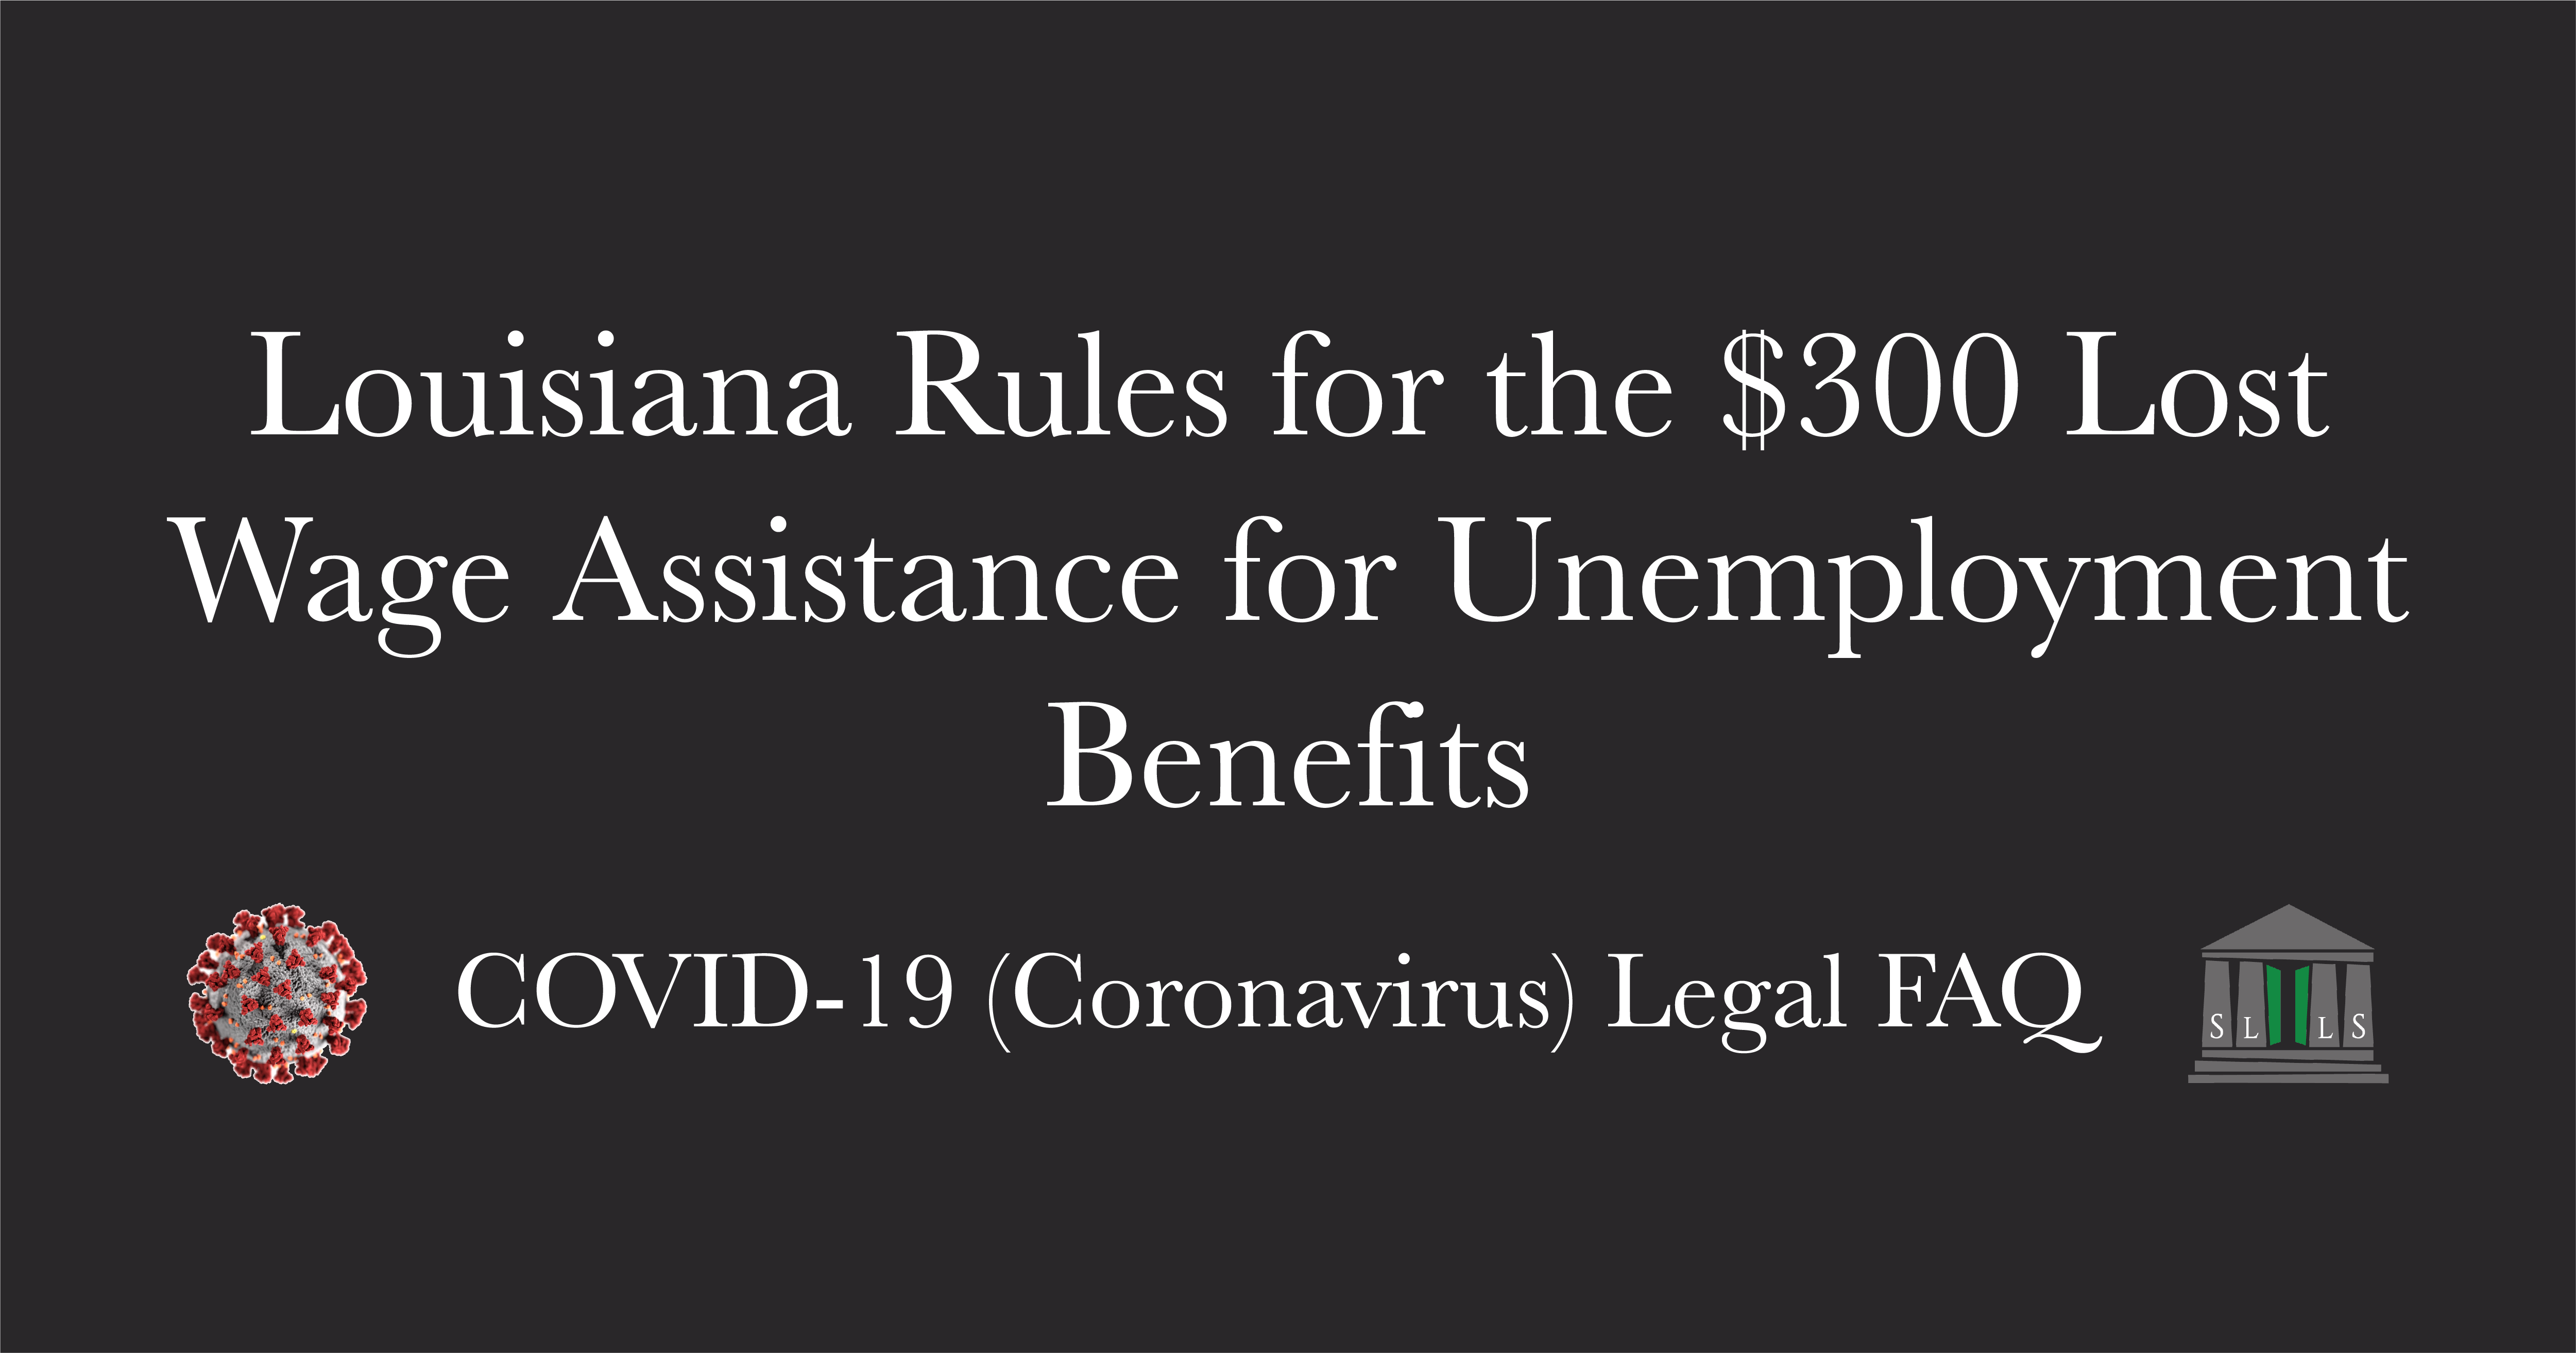 Louisiana Rules for the $300 Lost Wage Assistance for Unemployment Benefits - SLLS